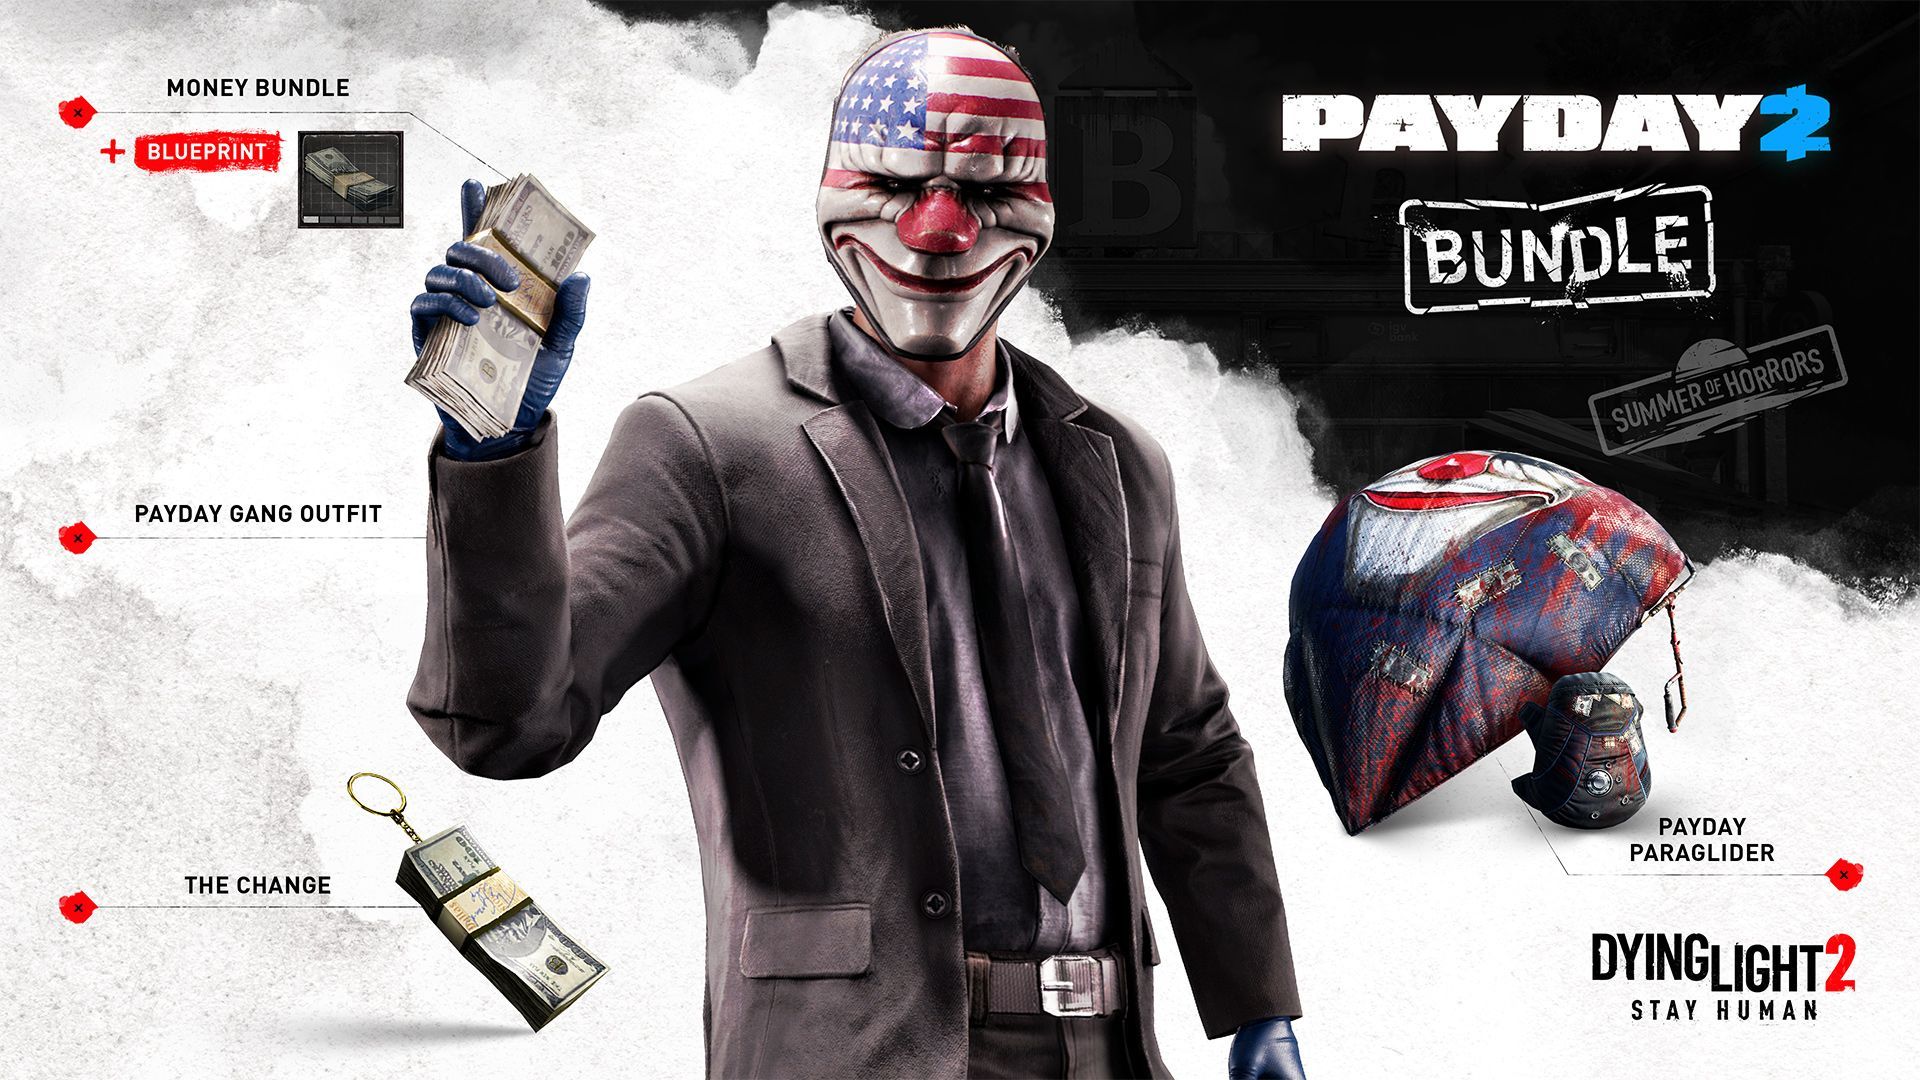 Dying Light 2 Payday 2 crossover